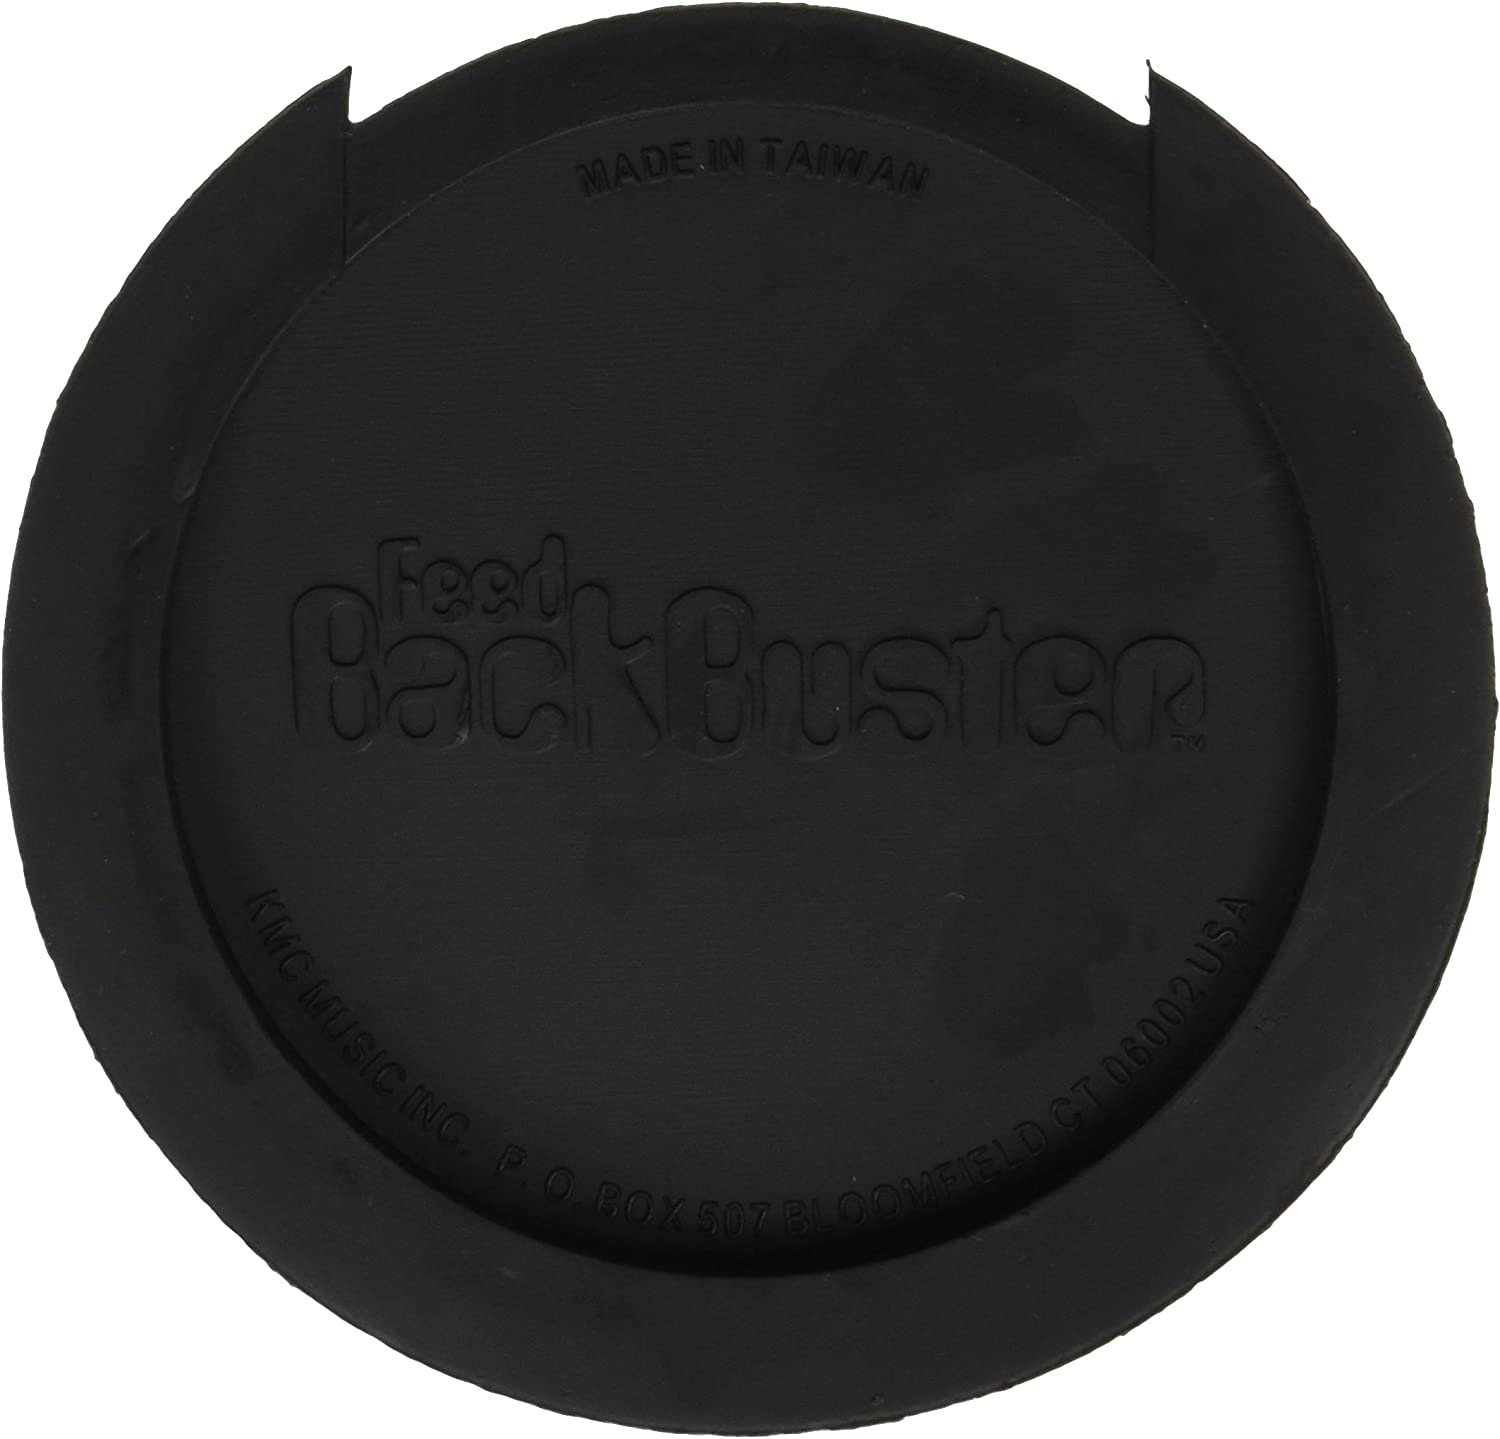 FBR2 - Feedback Buster - For Acoustic Guitars